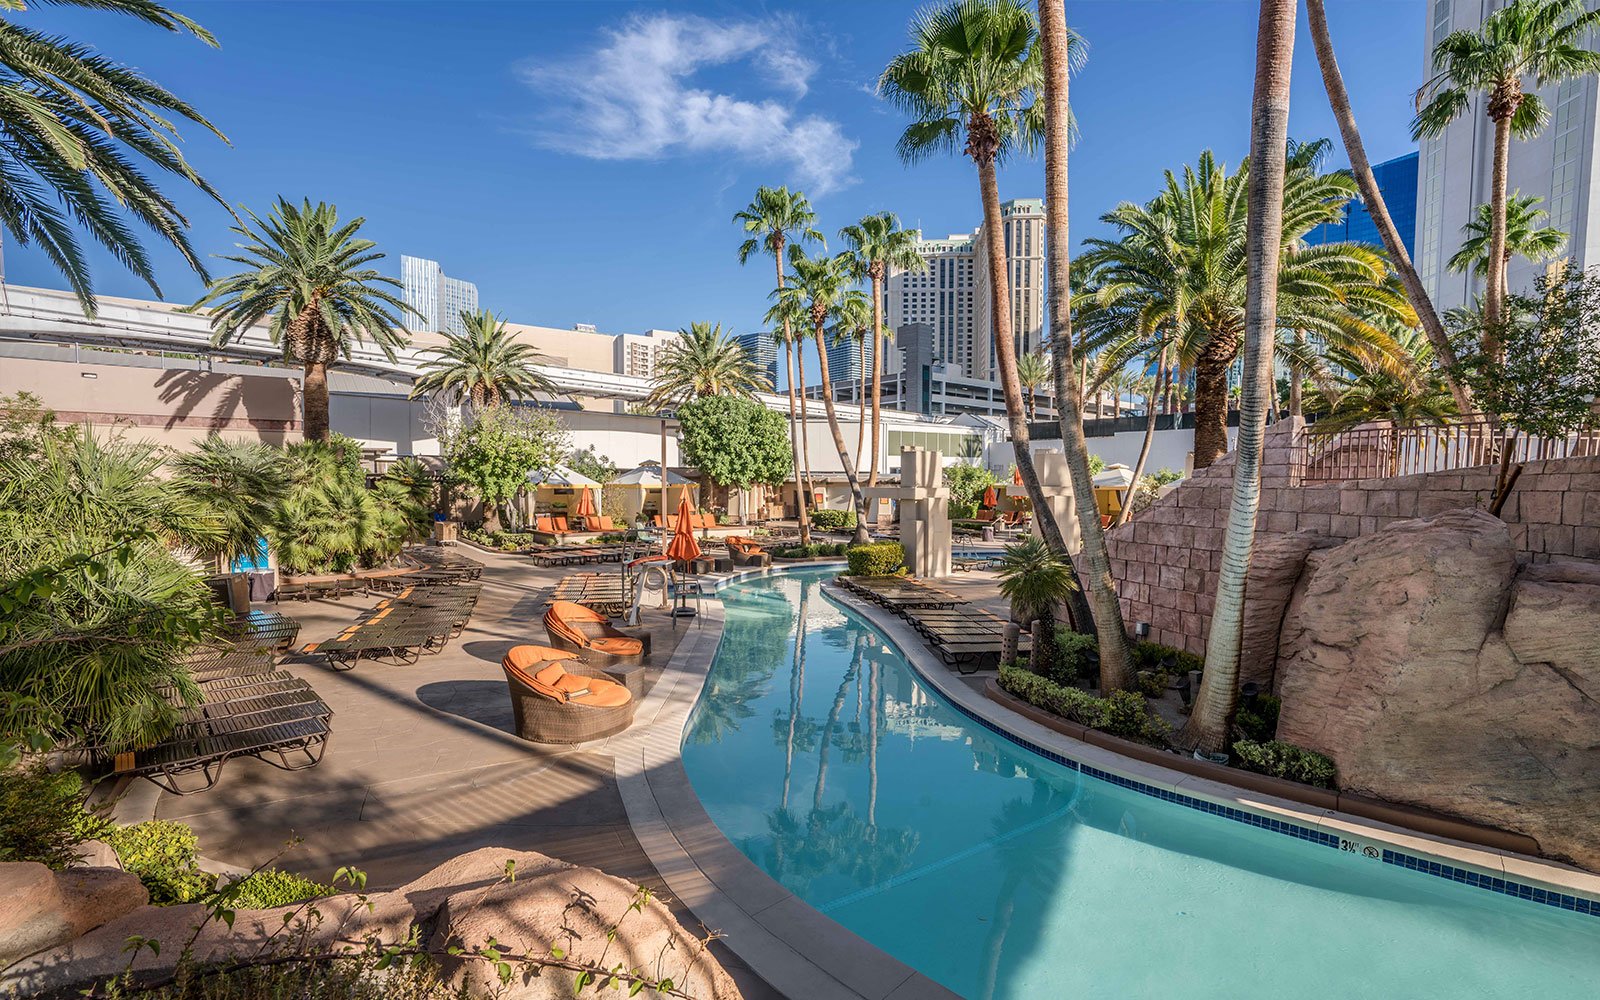 8 Best Vegas Day clubs with Pool Parties Las Vegas Entertainment